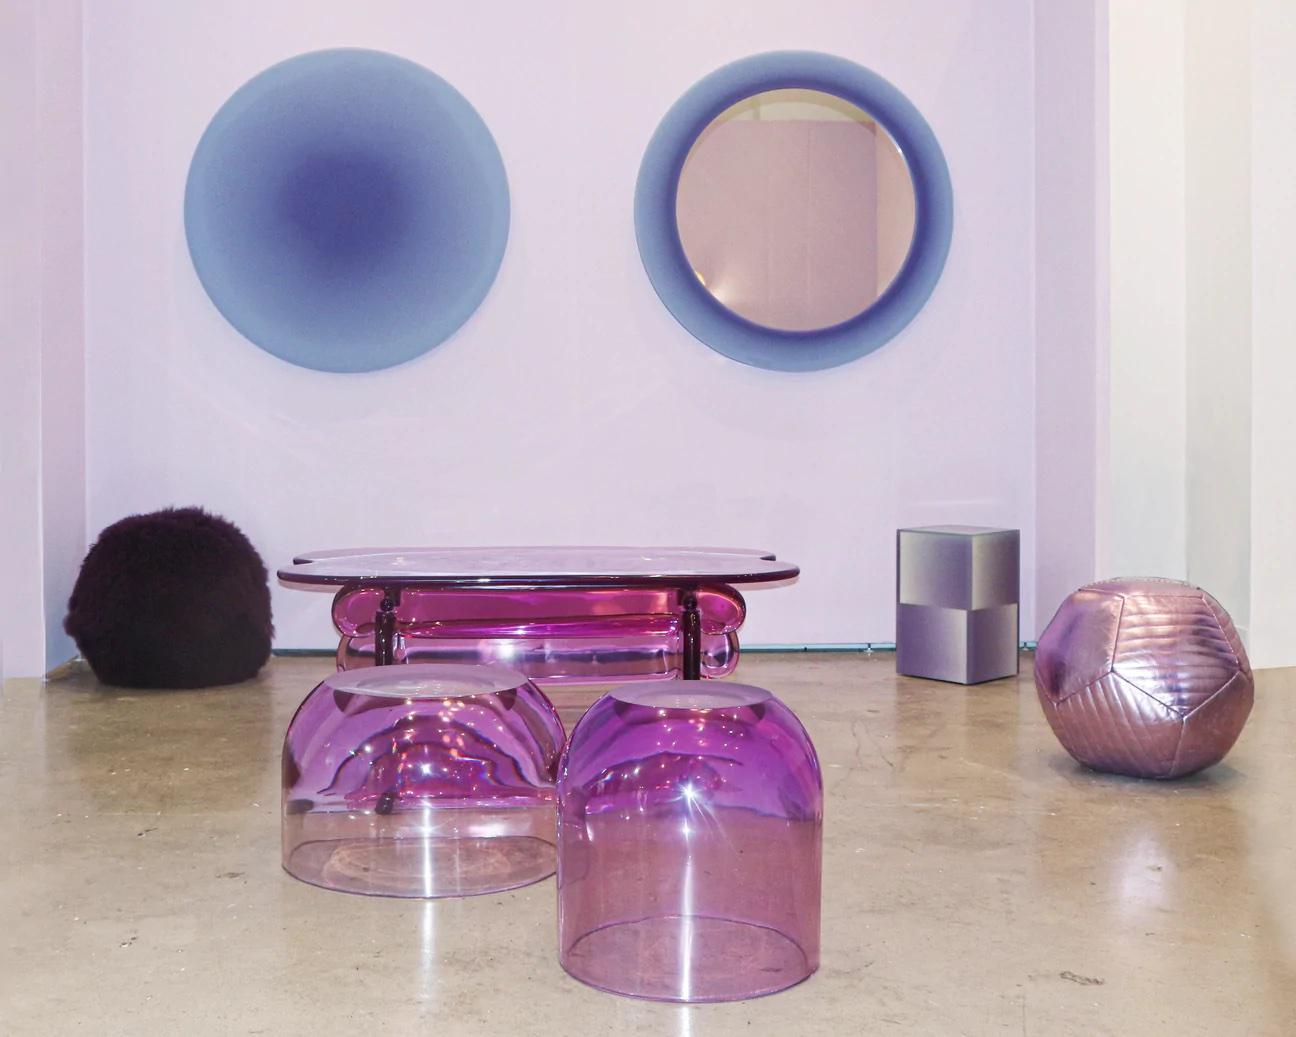 Designed to be a table or a stool, the dew drop comes in a variety of colors and heights. The artwork is exciting, using technique further play upon resin’s ability to effect light with volume and color. The thickness changes closer to the top